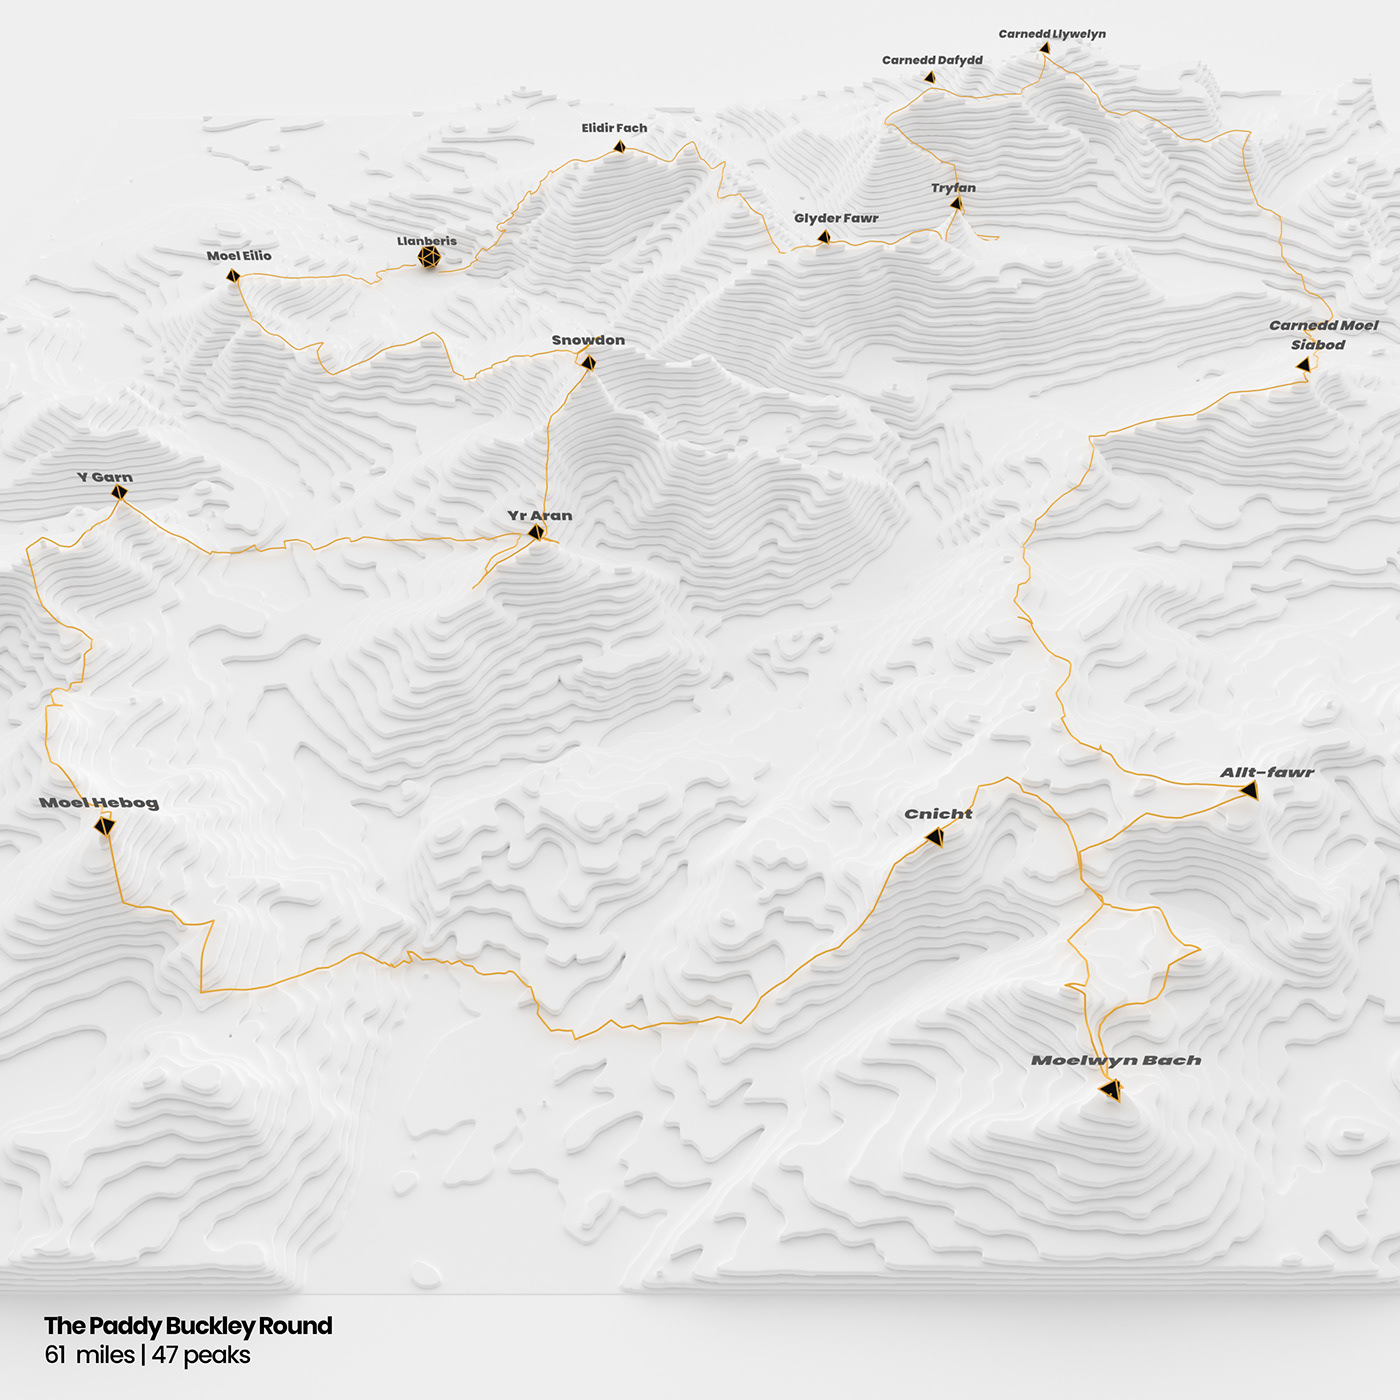 3D animation  Data data visualization map Mapping motion graphics  mountains race tourdefrance